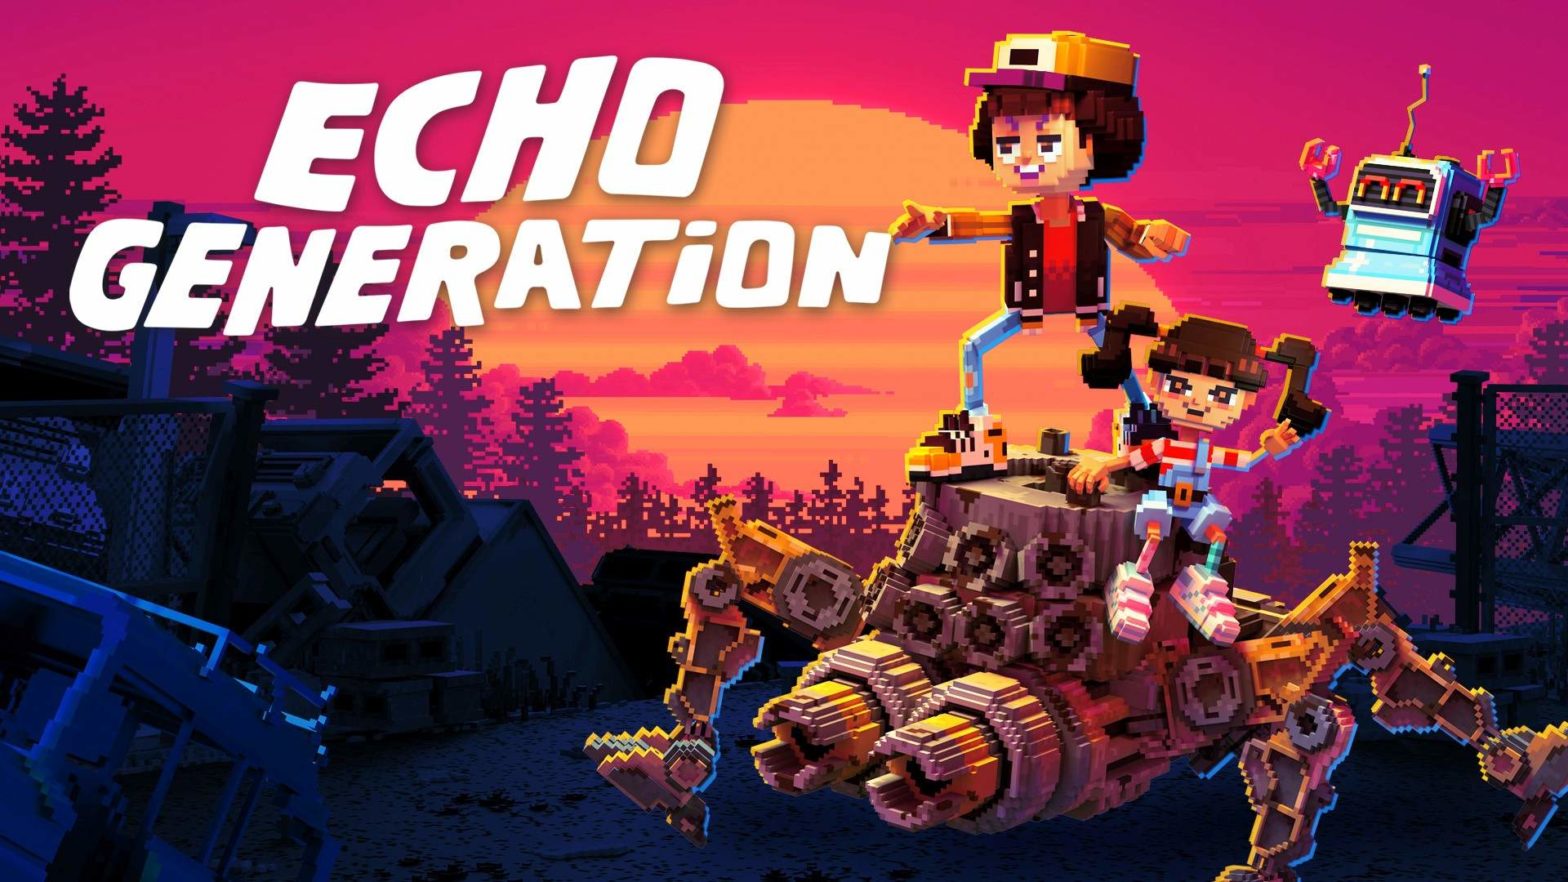 Echo Generation, a Monster Mech Mashup, Launches Today with Xbox Game Pass